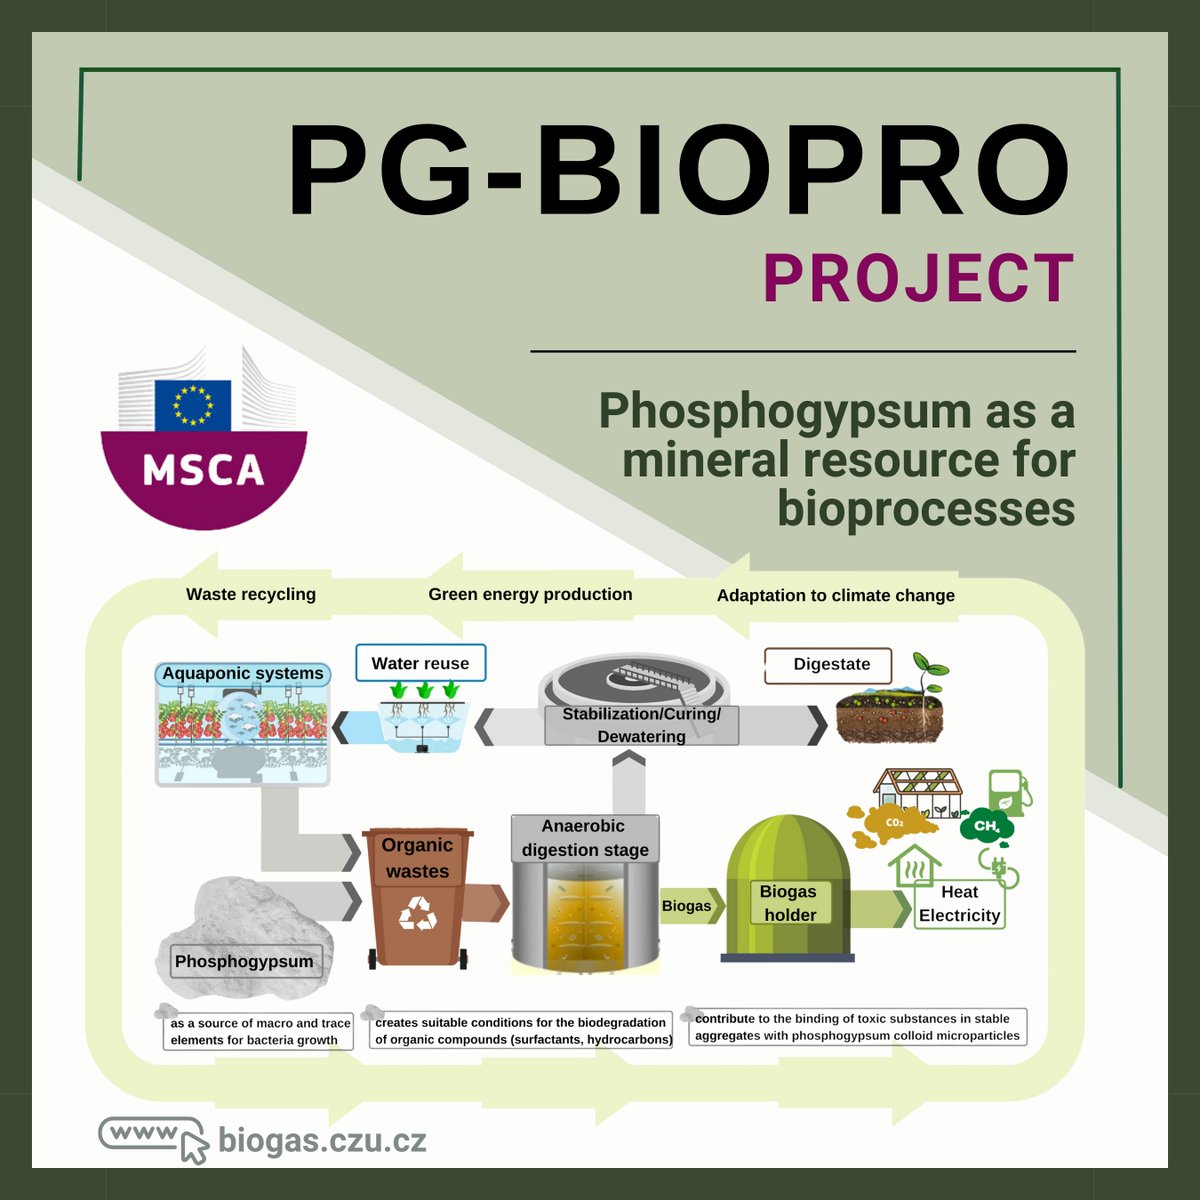 Introducing project: PG-BIOPRO💡

🔬Led by Assoc. Prof. Dr. @YelizavetaCher1, under the @EU_Commission MSCA Postdoctoral Fellowship, focusing on utilizing #phosphogypsum as a valuable mineral resource for #bioprocesses.

🌐buff.ly/3w4X8et
#BiogasResearchTeam #PGBIOPRO